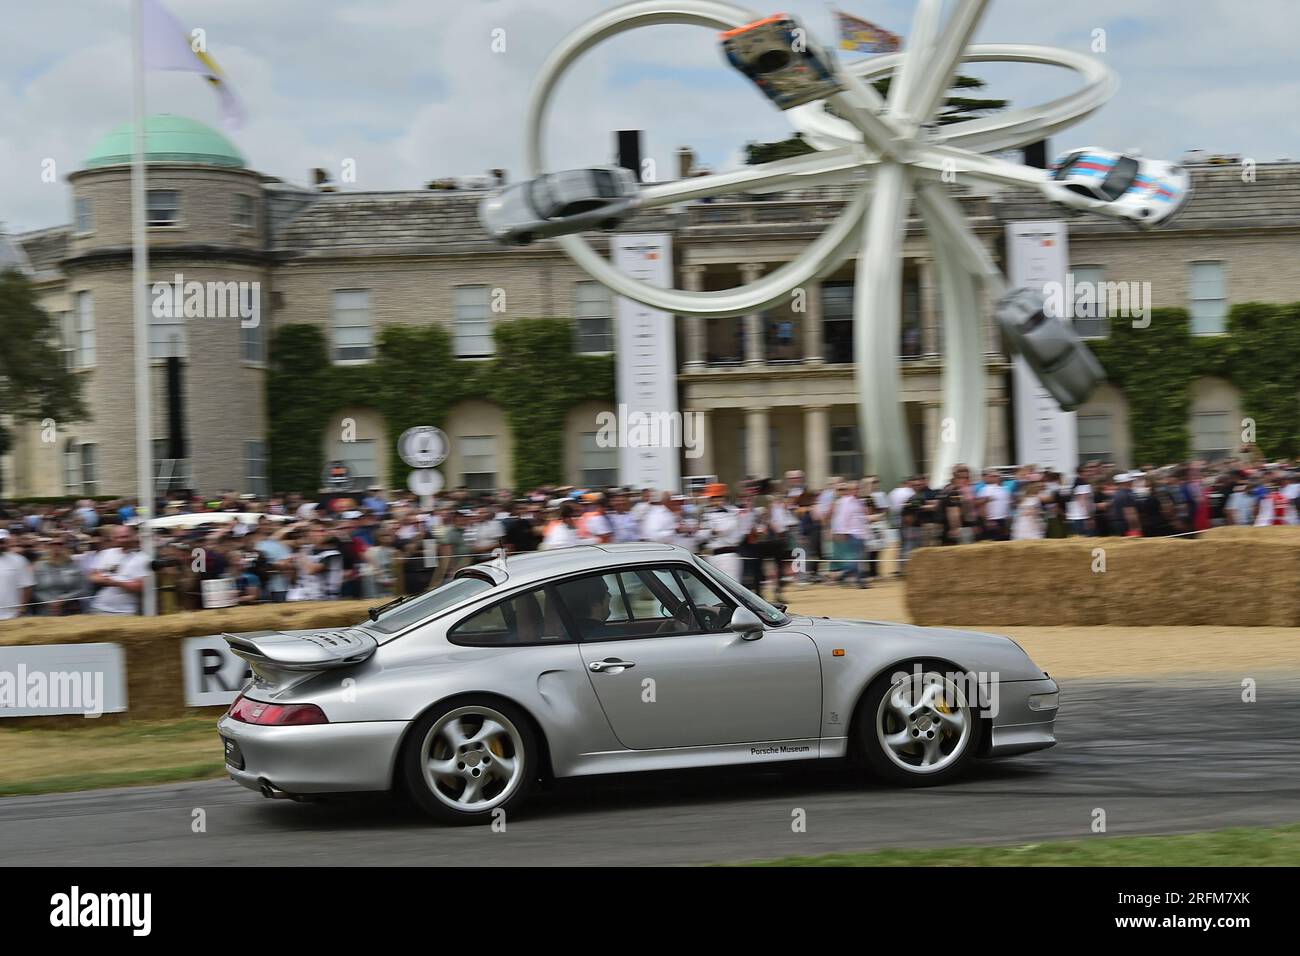 Porsche 911, 75 Years of Porsche, 60 Years of the 911, with its iconic shape the 911 has participated in nearly every form of motorsport and continues Stock Photo